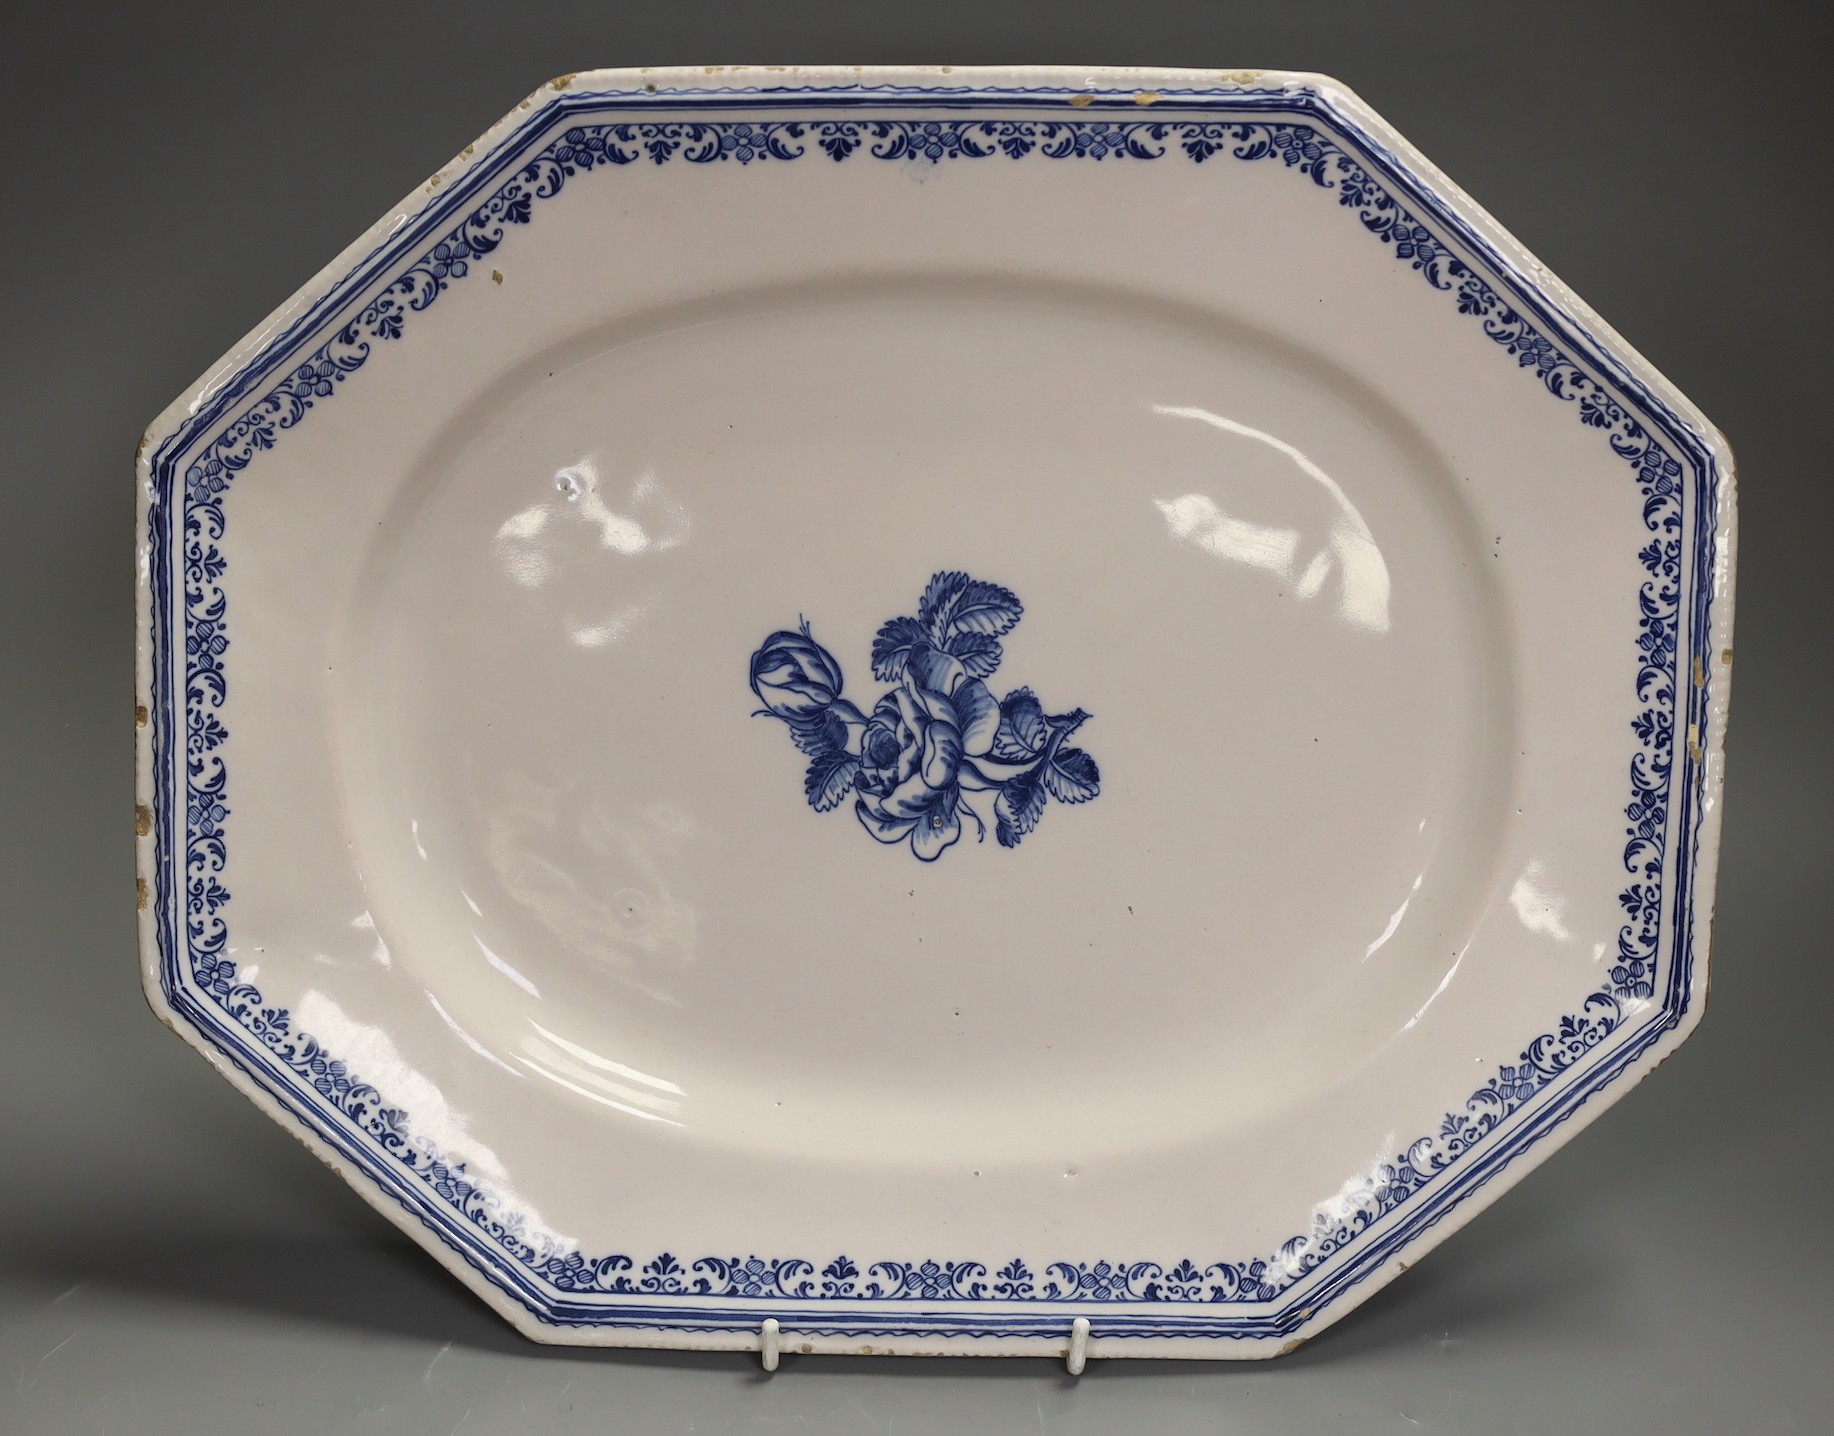 A French faience canted rectangular blue and white serving dish, probably Rouen, second quarter 18th century, 38cm